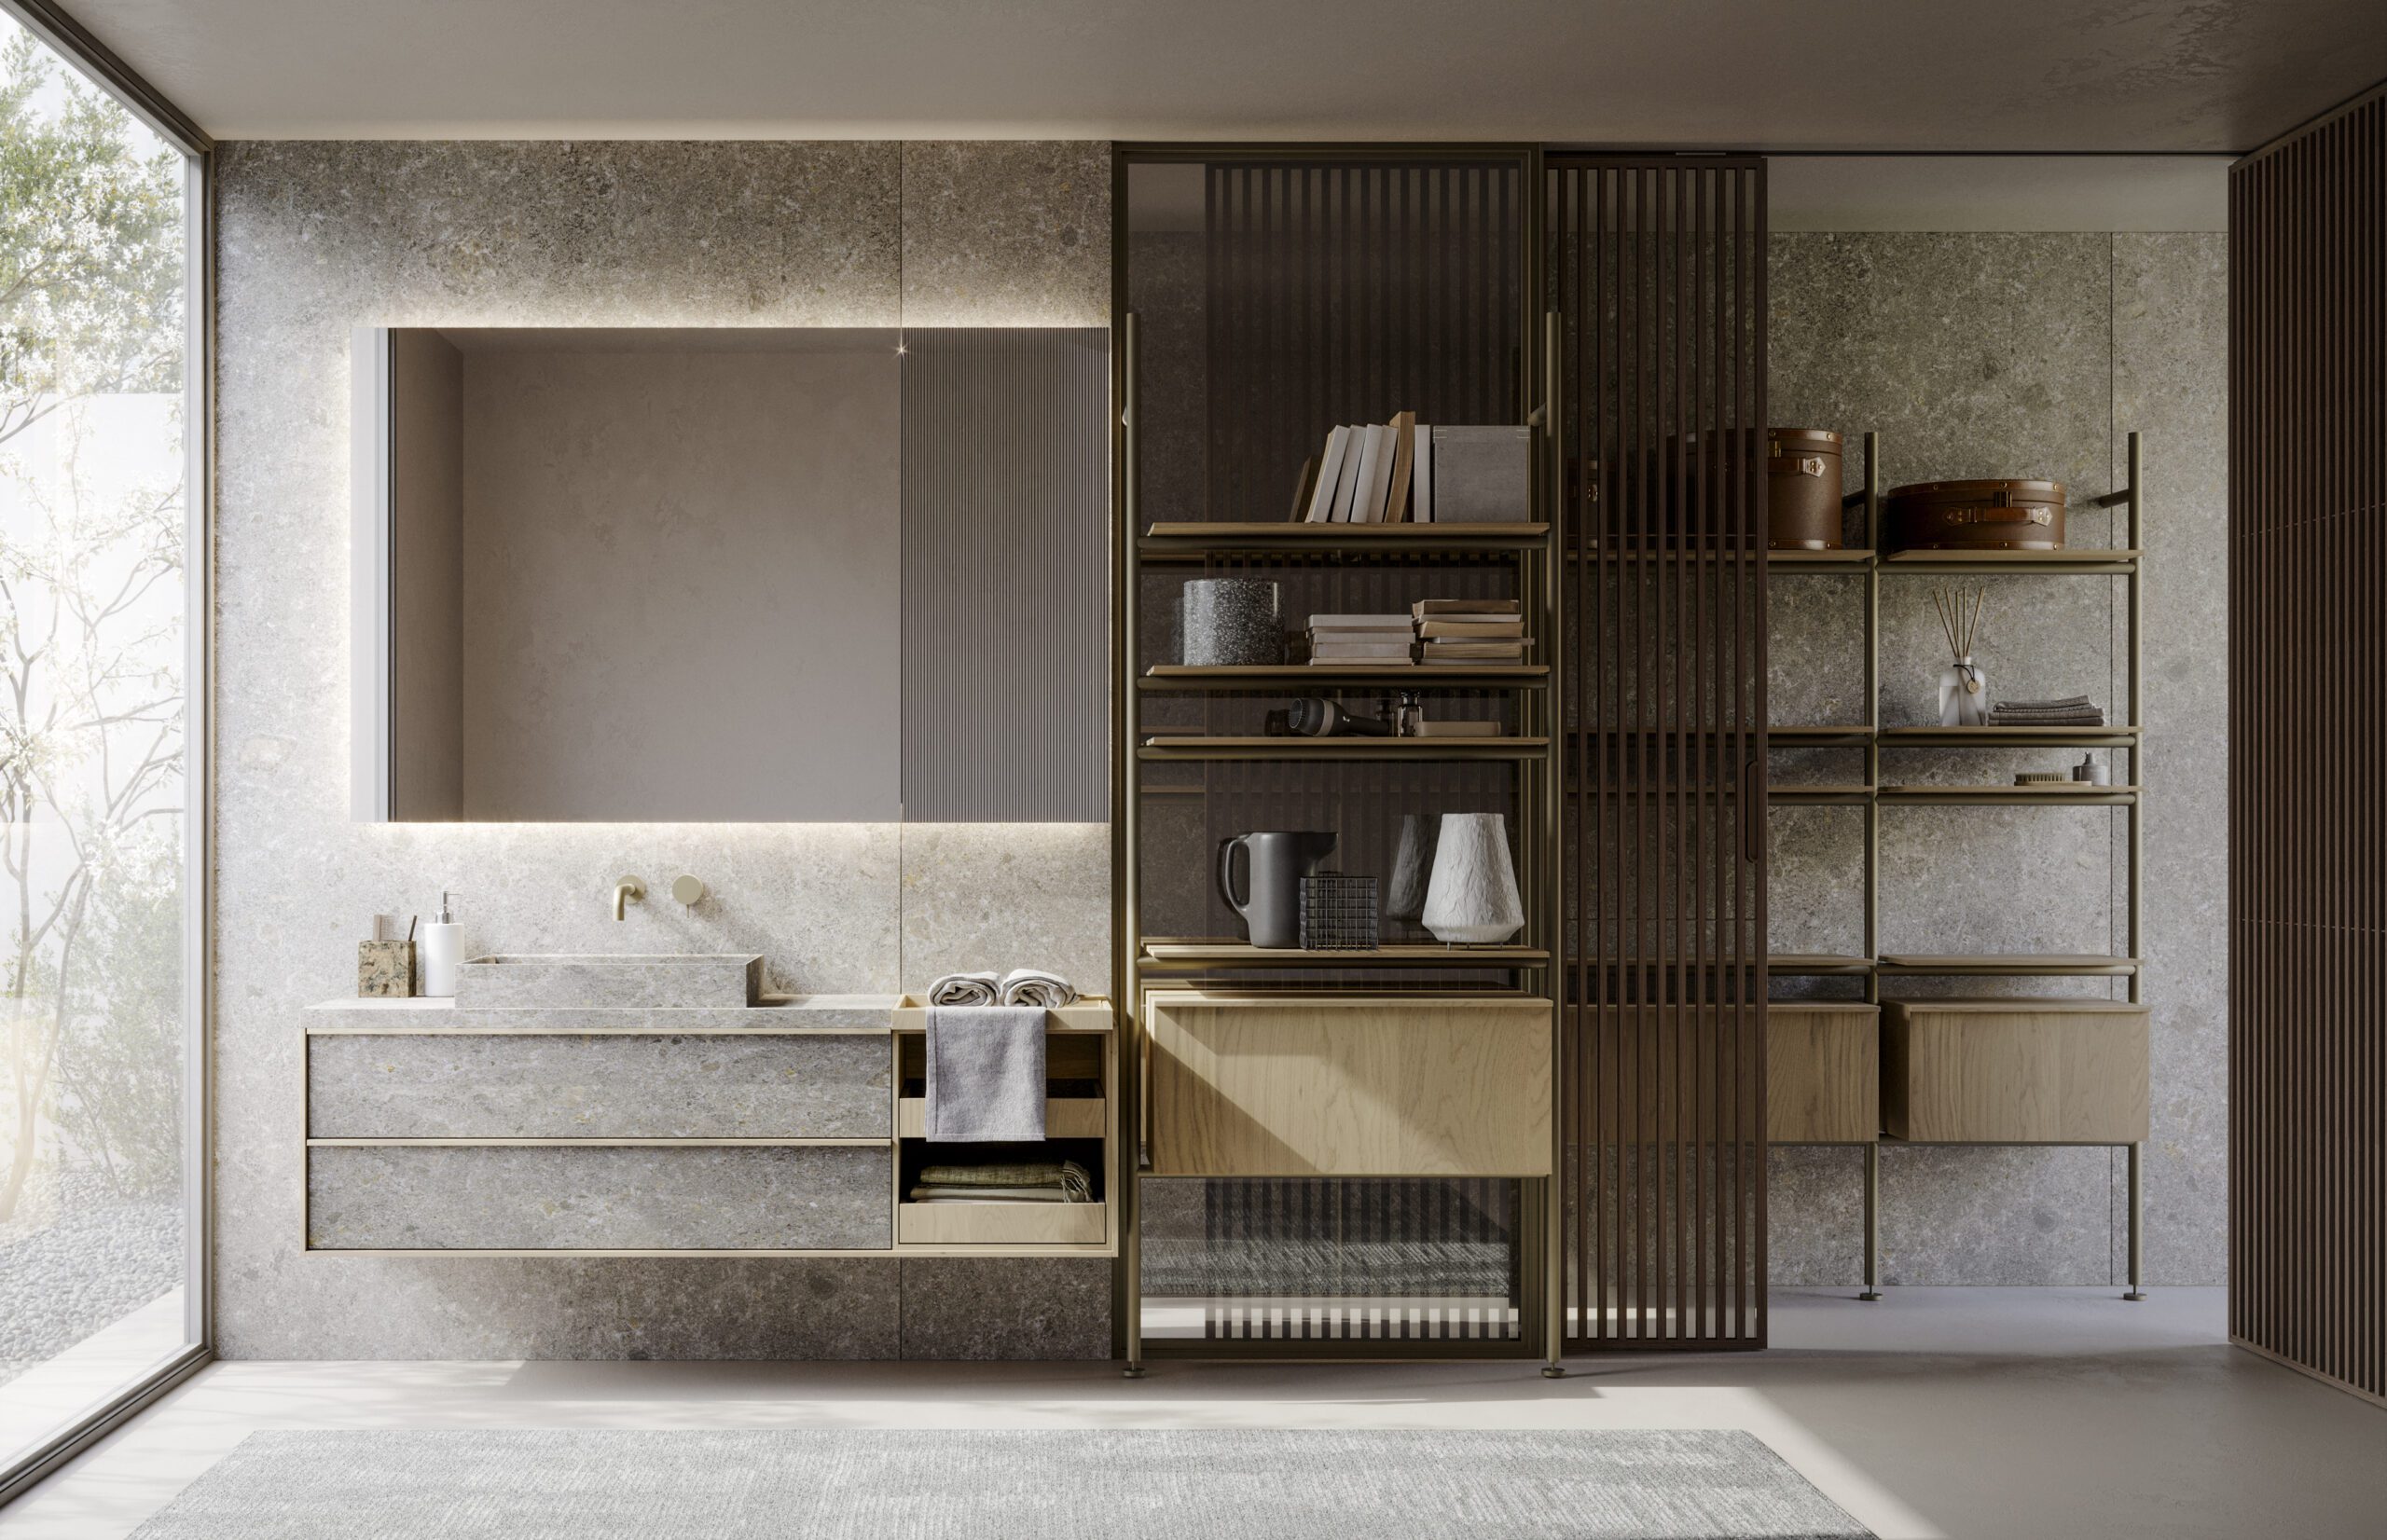 Luxury bath with Sartus cabinet in Grès Meteora Gris bocciardato. Drappers bookcase and storage system in Rovere Avena wood, also used for the cabinet frame. 